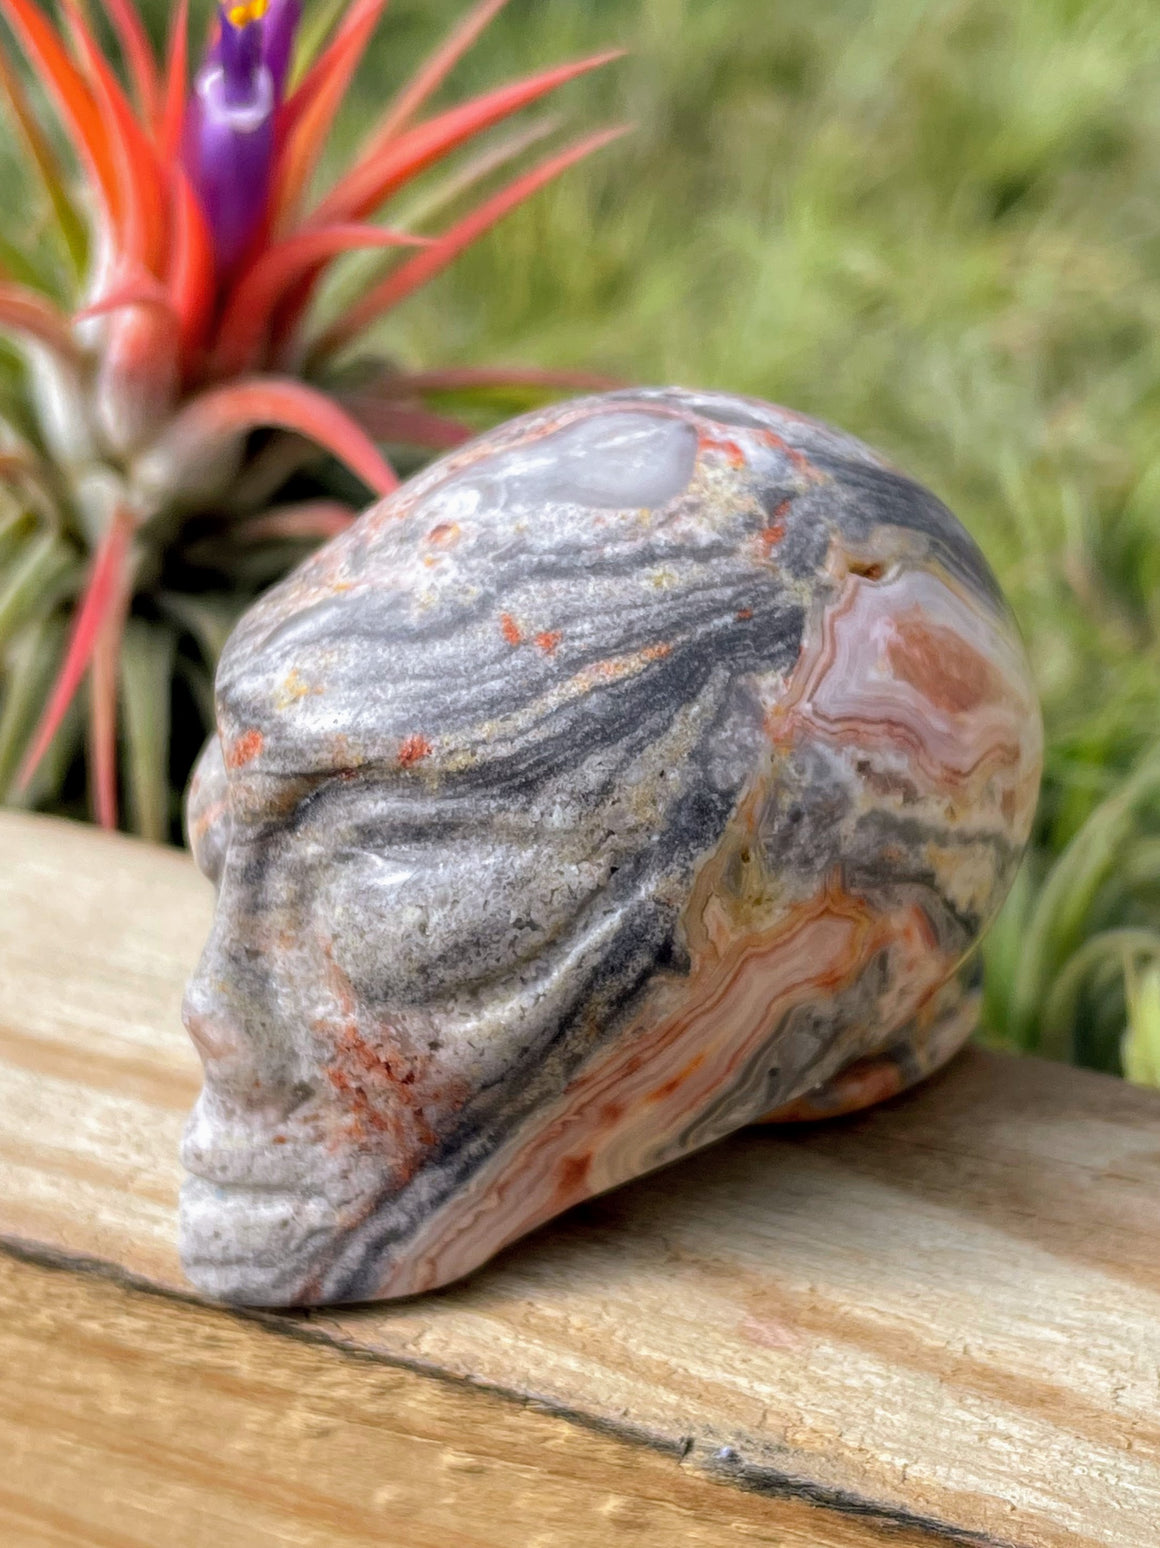 Pink Crazy Lace Agate Alien Skull Carving